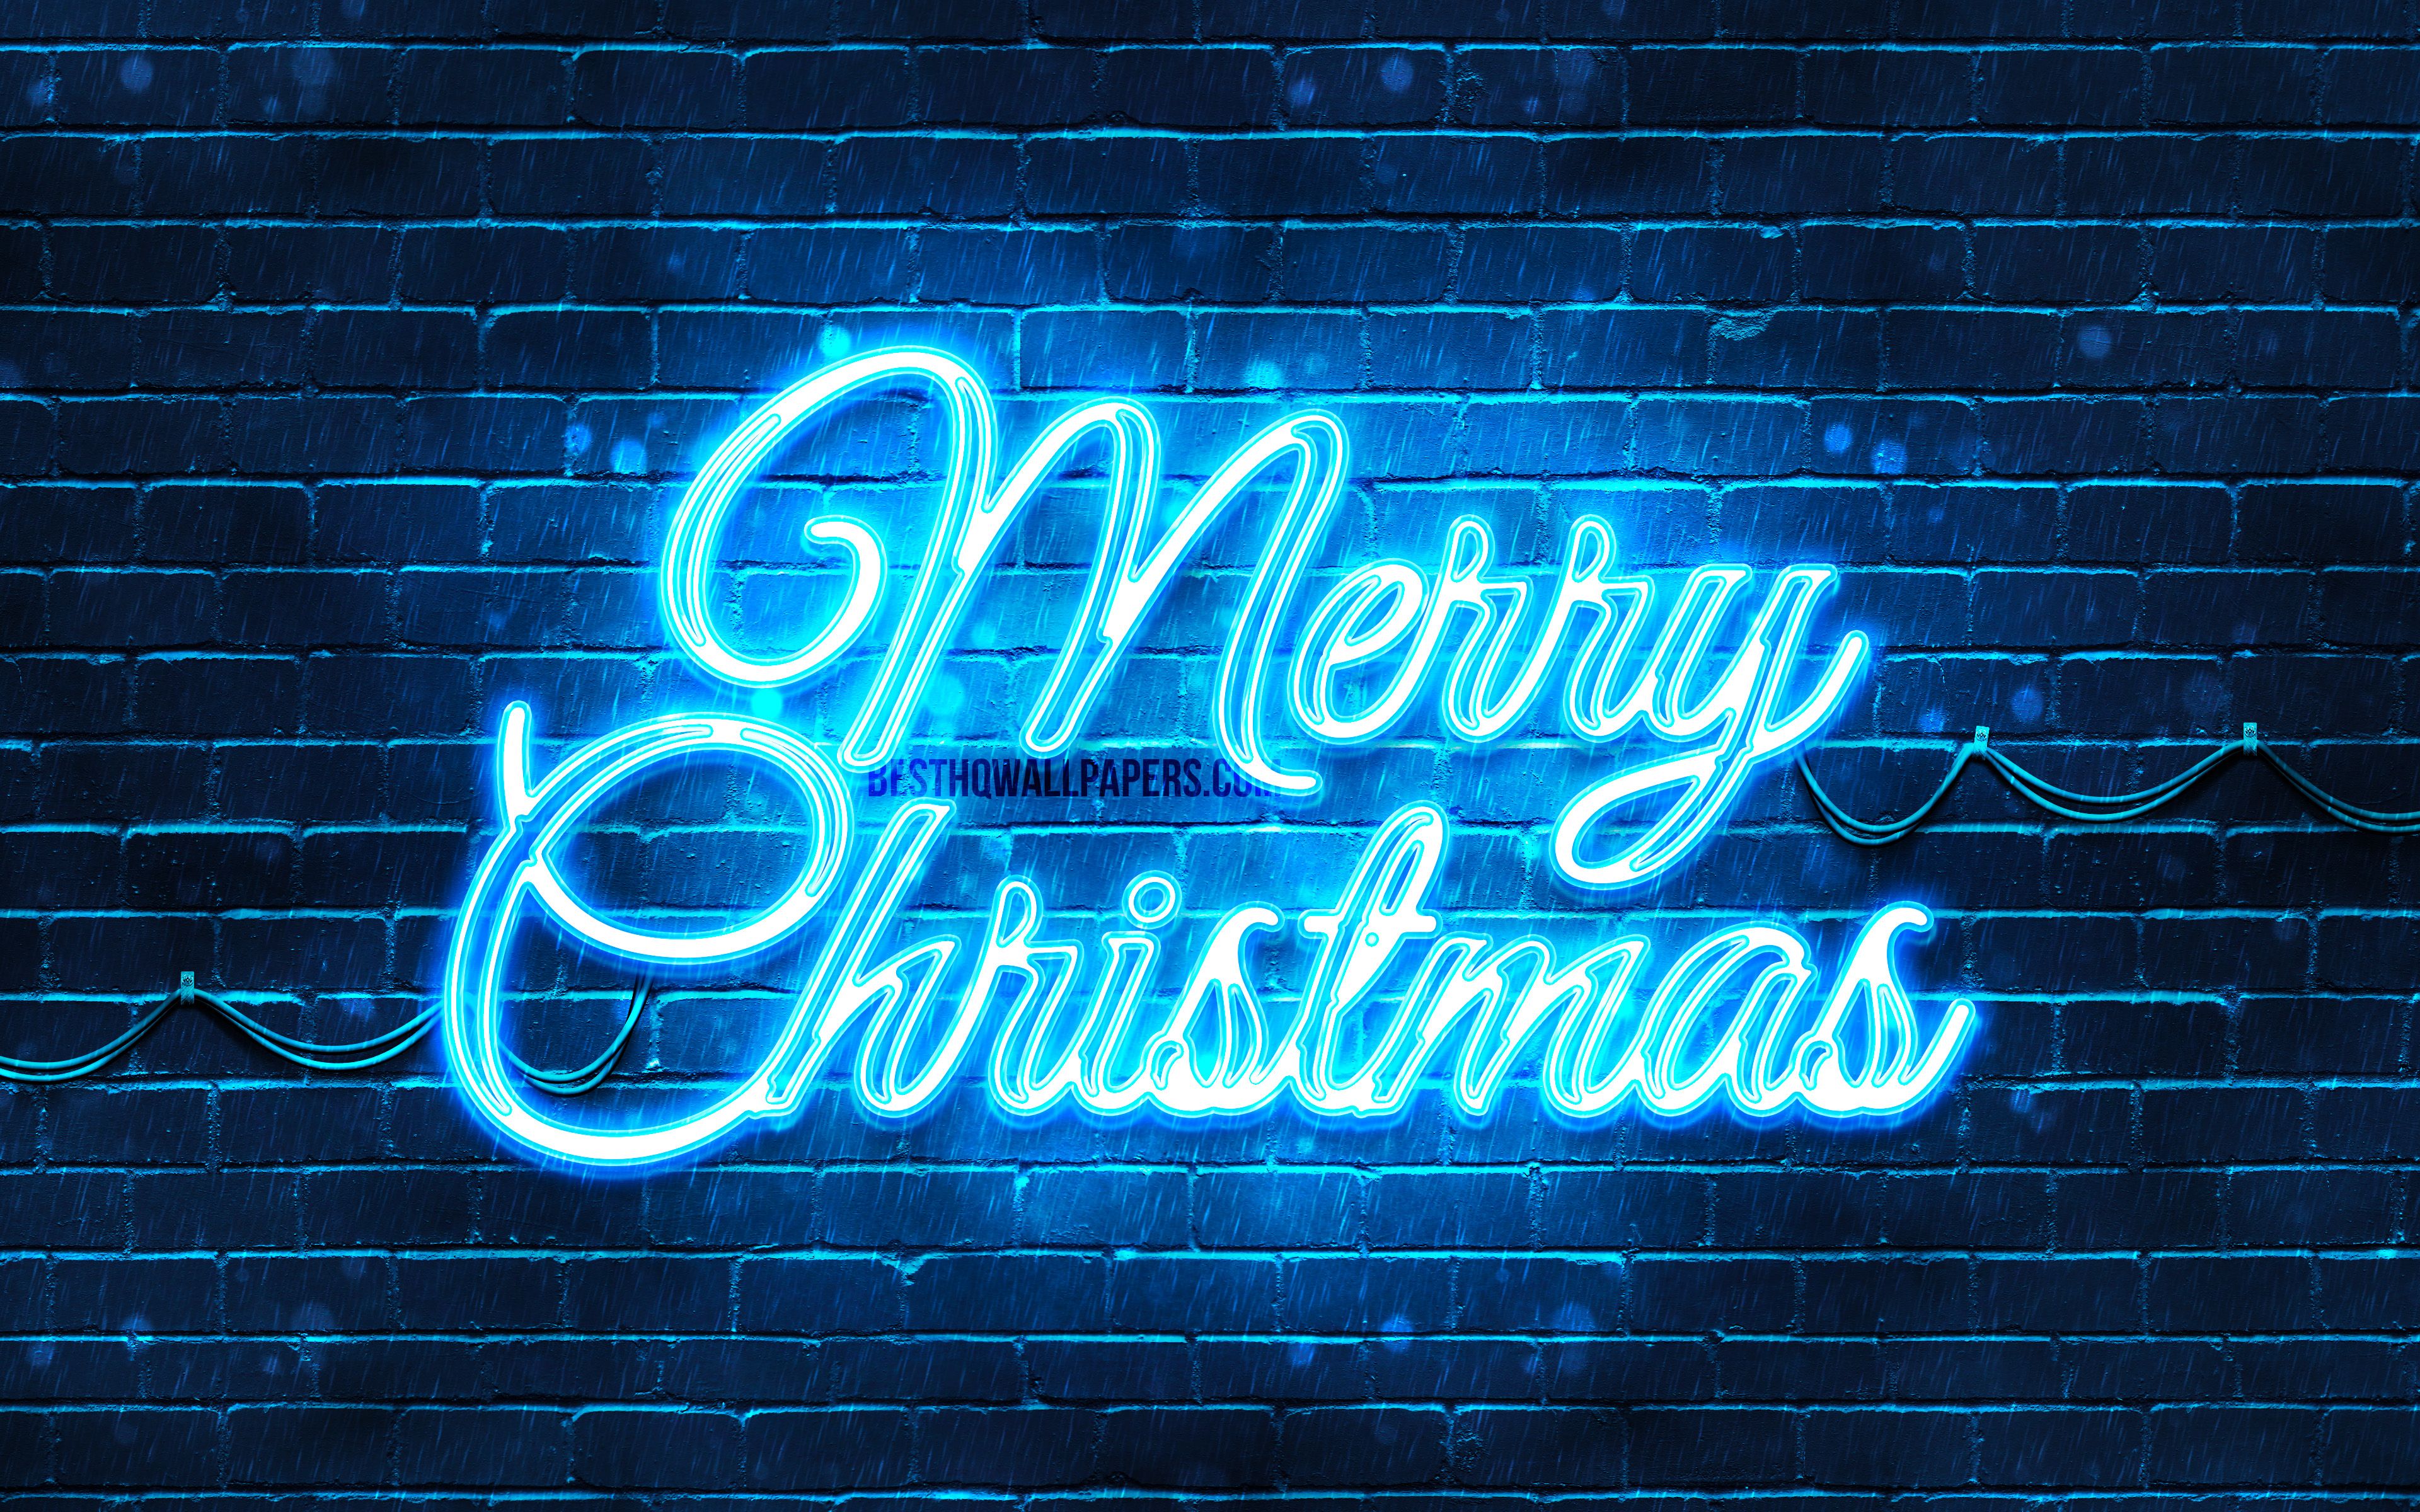 Download wallpaper Blue neon Merry Christmas, 4k, blue brickwall, Happy New Years Concept, Blue Merry Christmas, creative, Christmas decorations, Merry Christmas, xmas decorations for desktop with resolution 3840x2400. High Quality HD picture